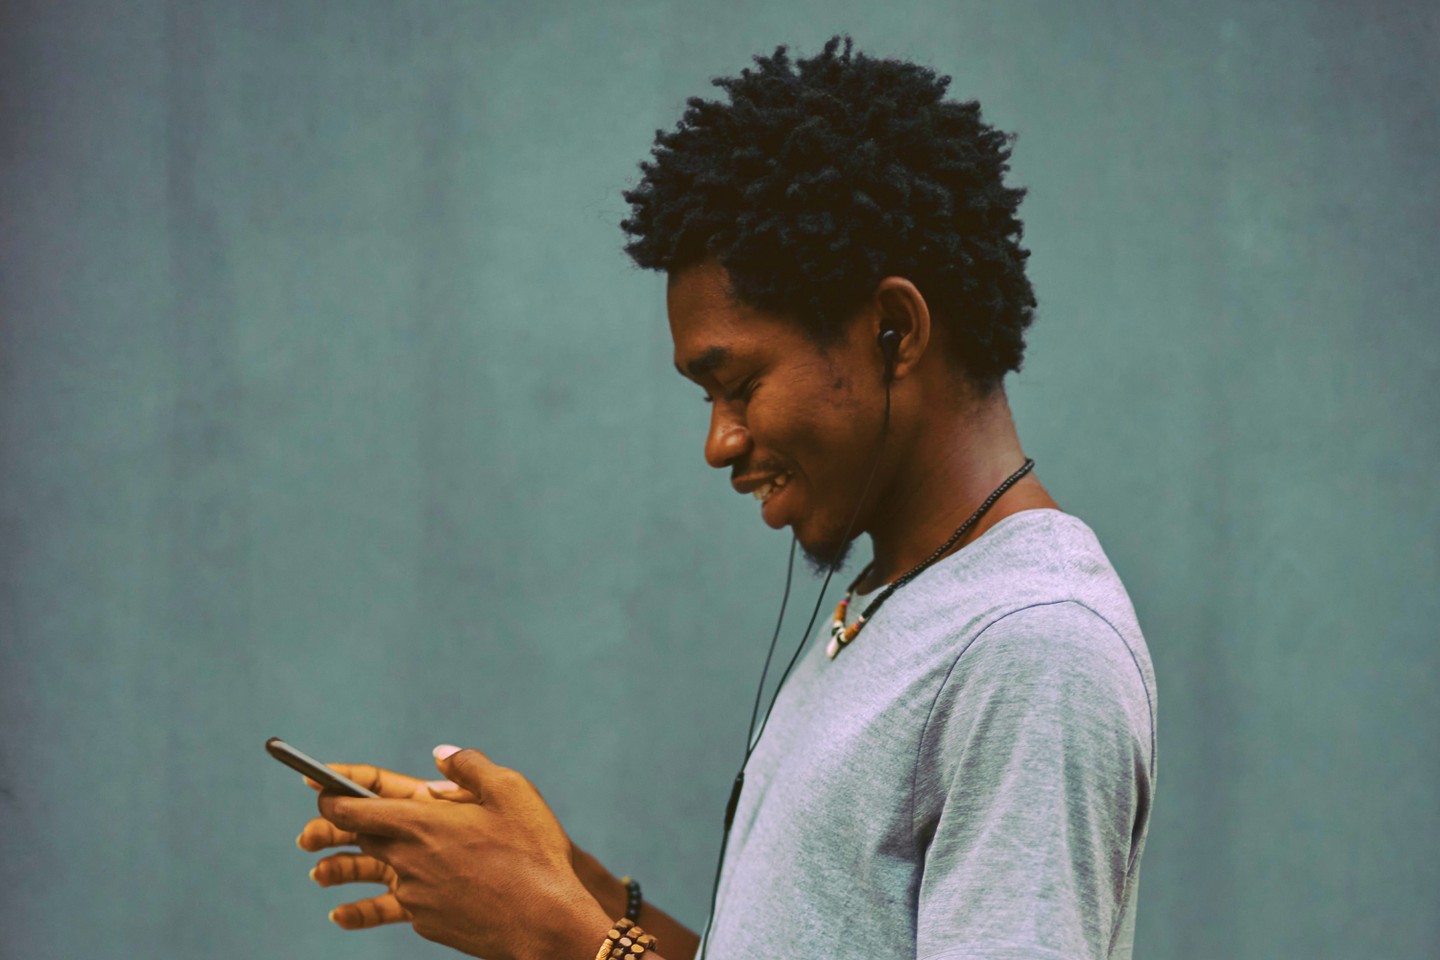 Man holding phone and smiling